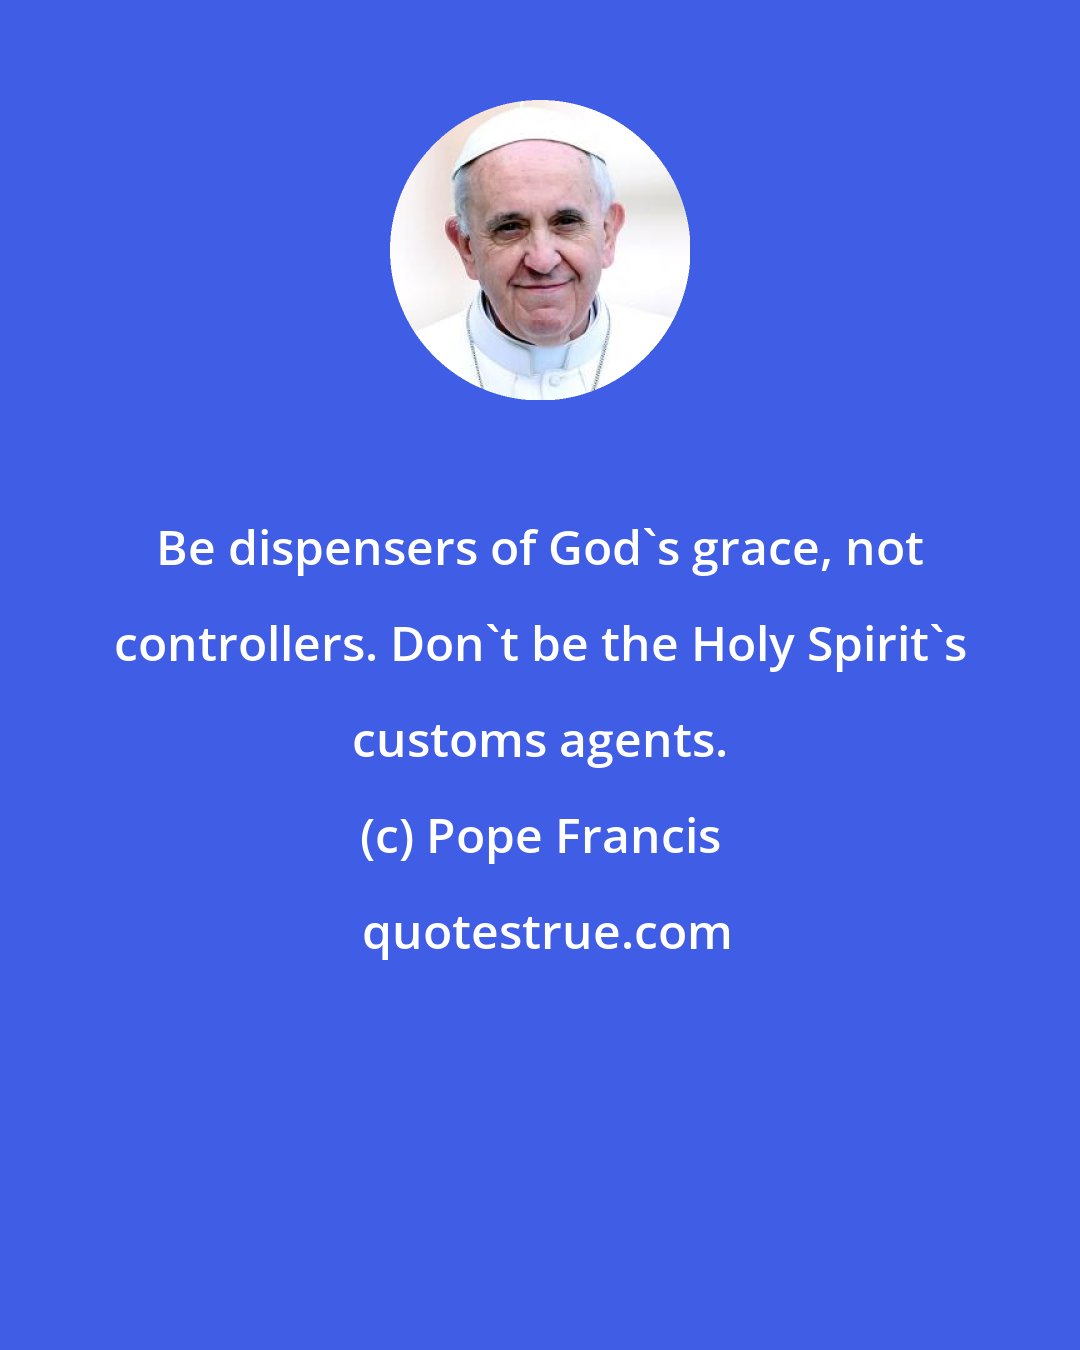 Pope Francis: Be dispensers of God's grace, not controllers. Don't be the Holy Spirit's customs agents.